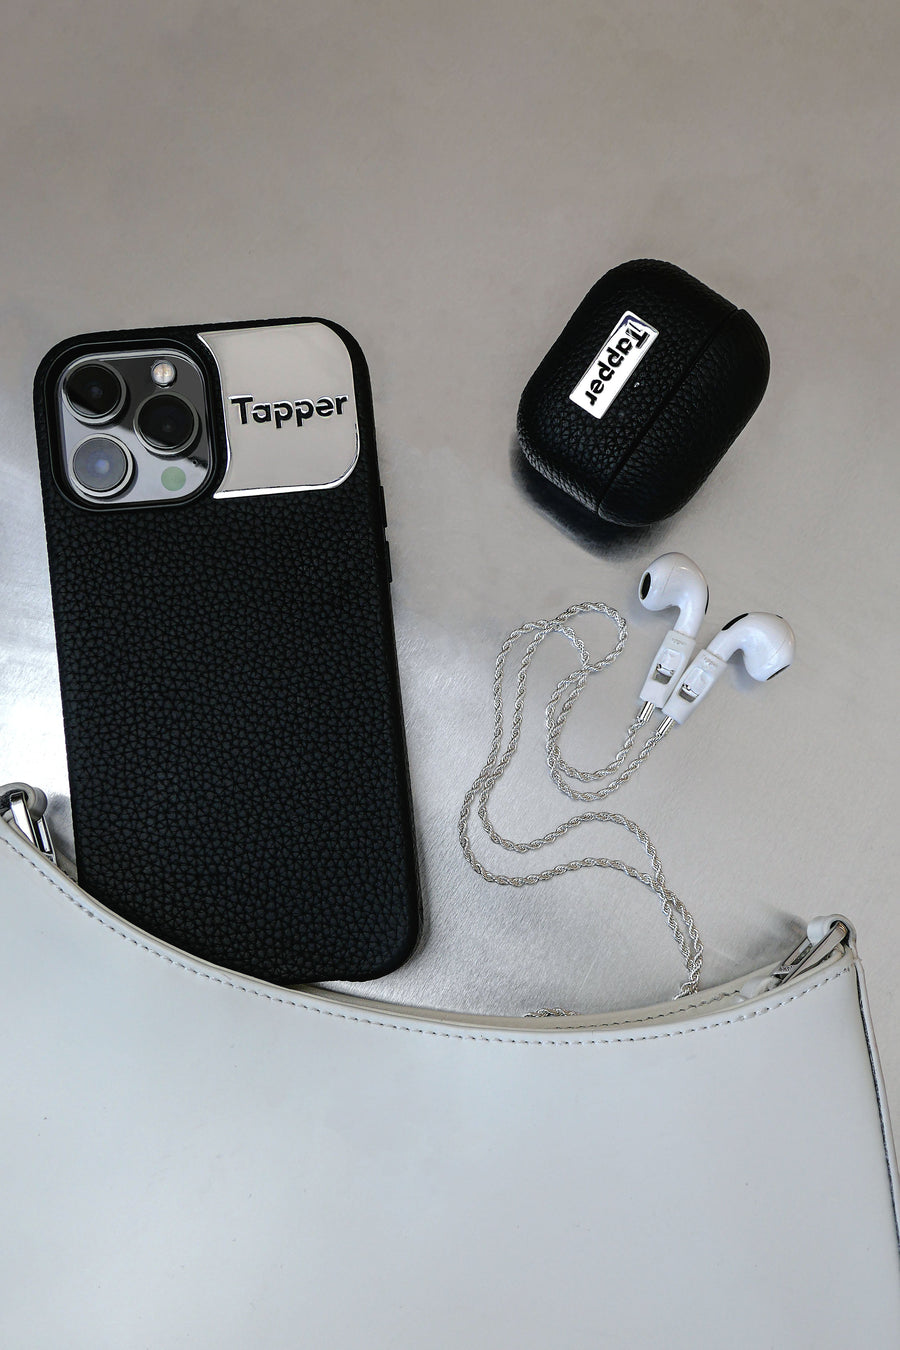 Tapper's luxurious black genuine cow leather iPhone 13 Pro Max case with MagSafe and a metal logo plate colored in silver that protects and elevates the look of your iPhone 13 Pro. The next must-have high end protective Apple iPhone accessory in real leather and metal details. Designed in Sweden by Tapper. Free Express Shipping at gettapper.com